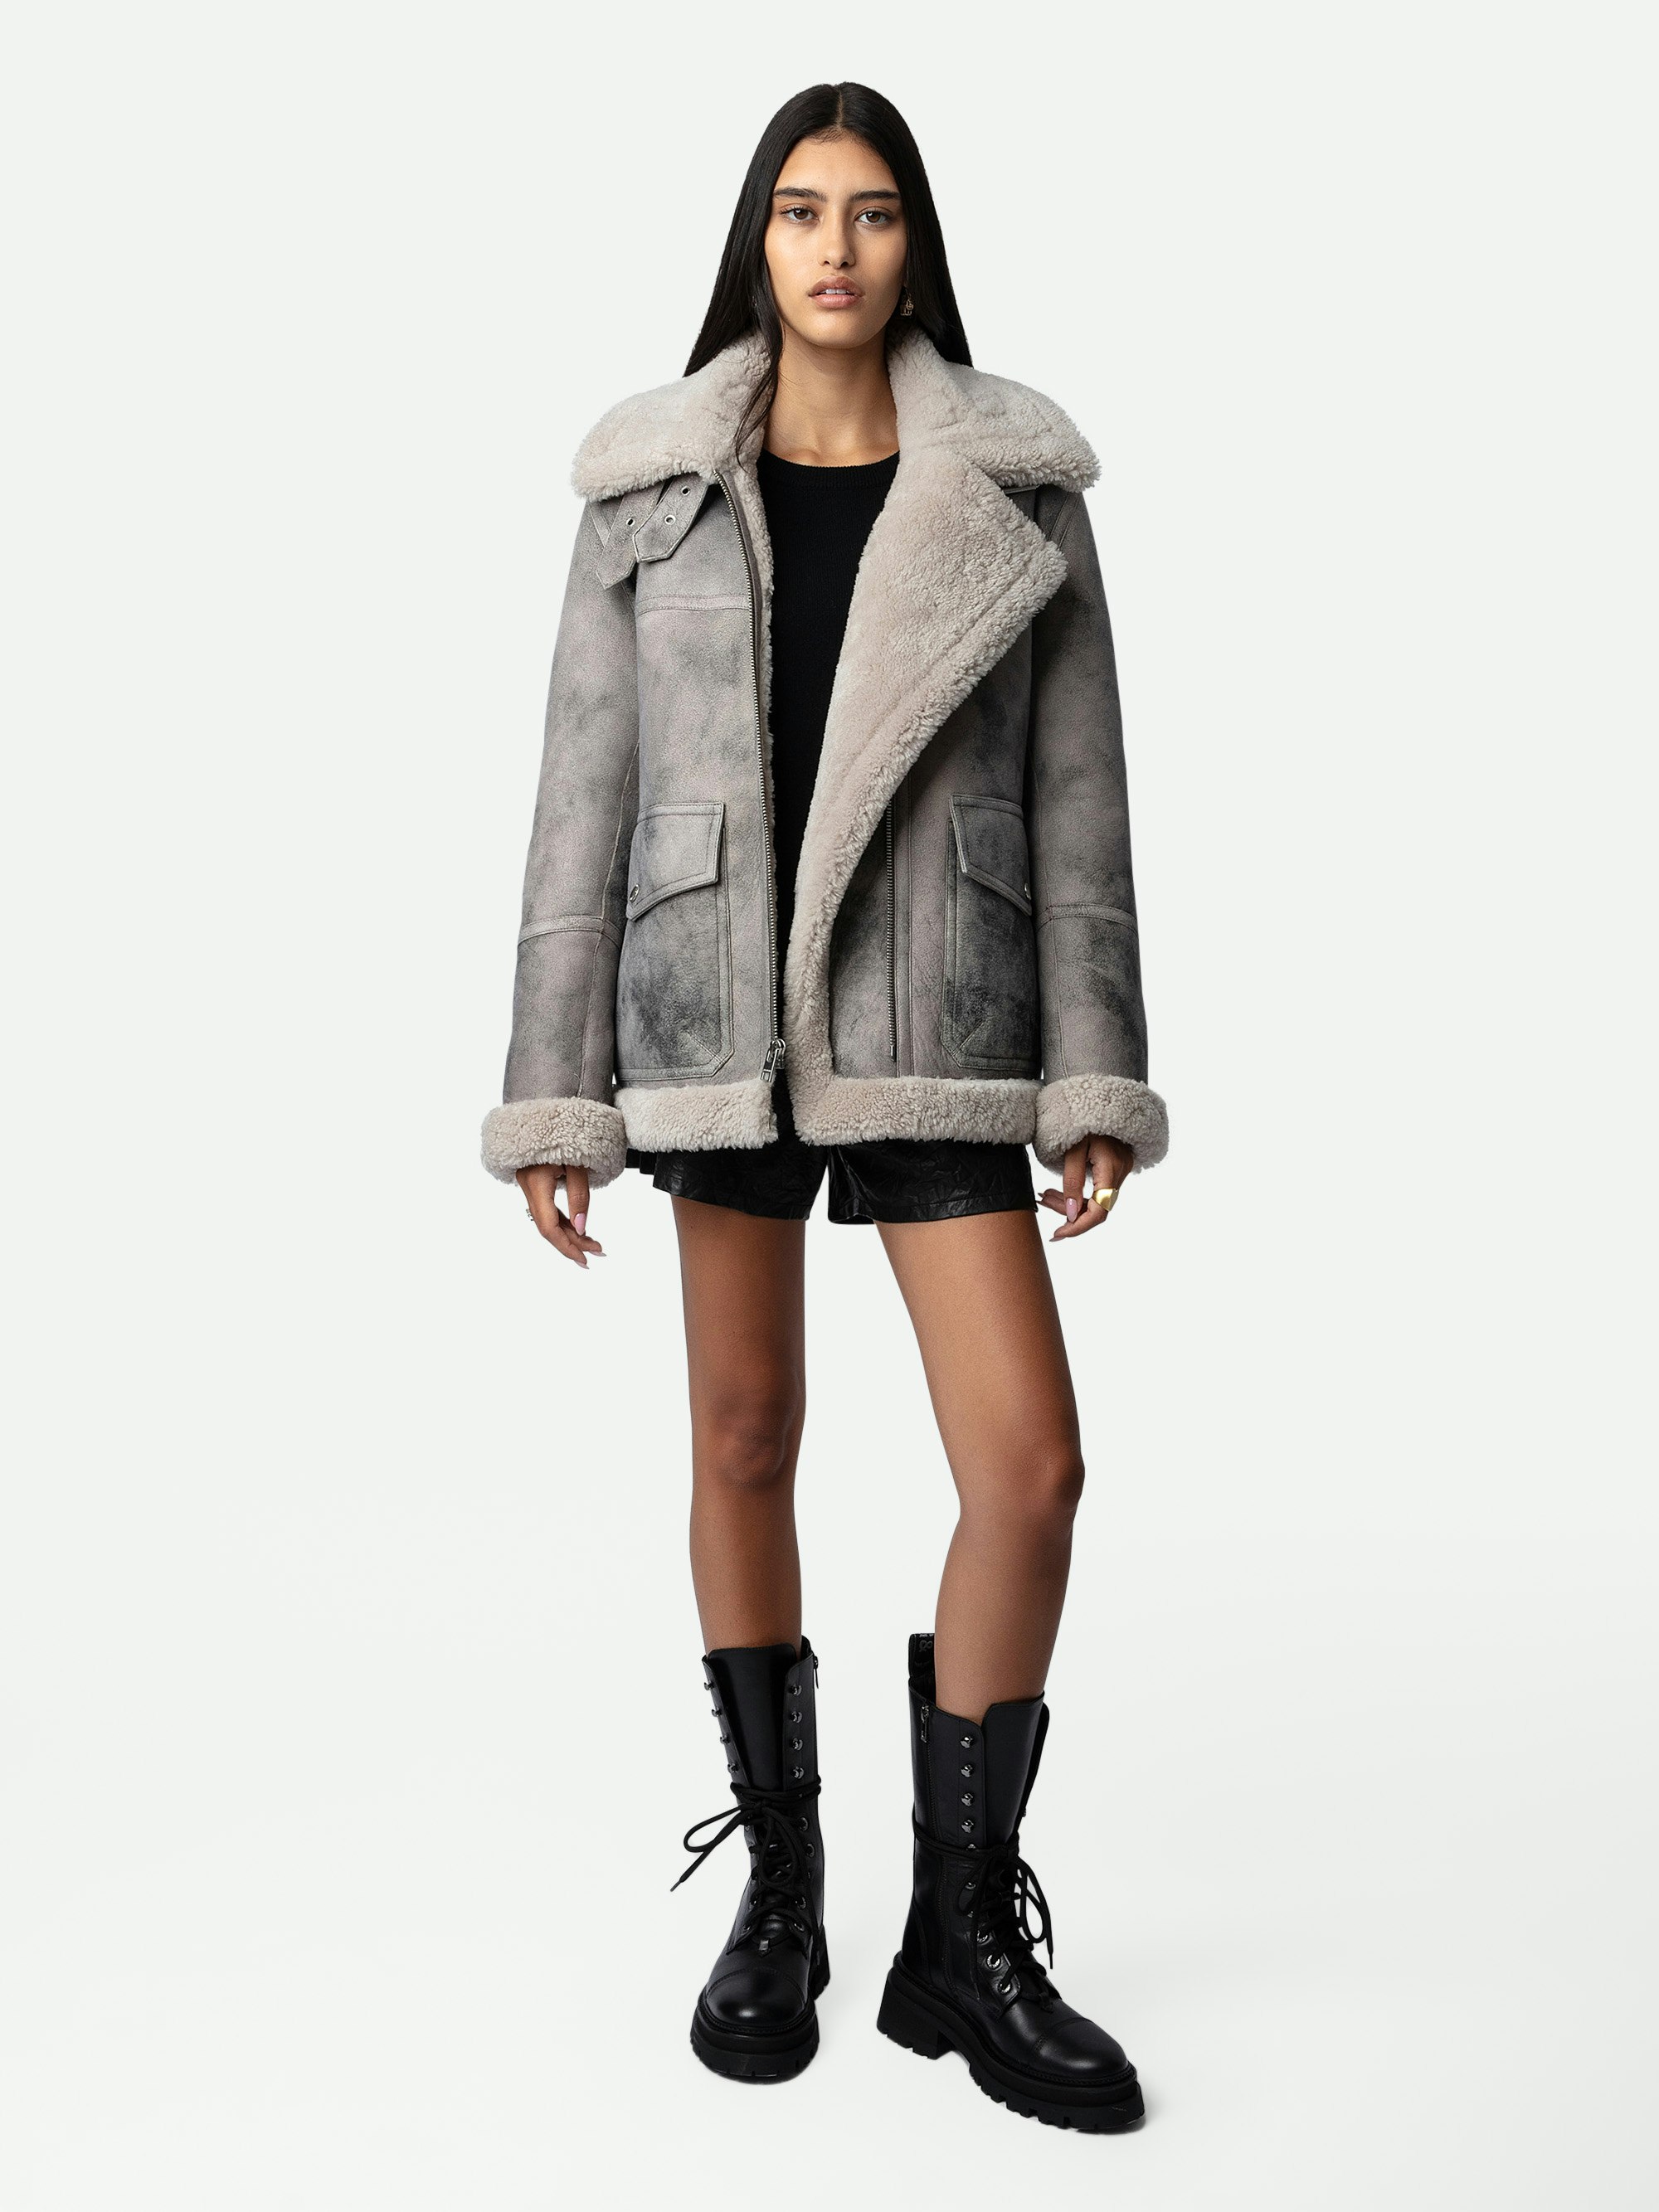 Kain Shearling Coat - Women's anthracite shearling coat with fur-lined interior.